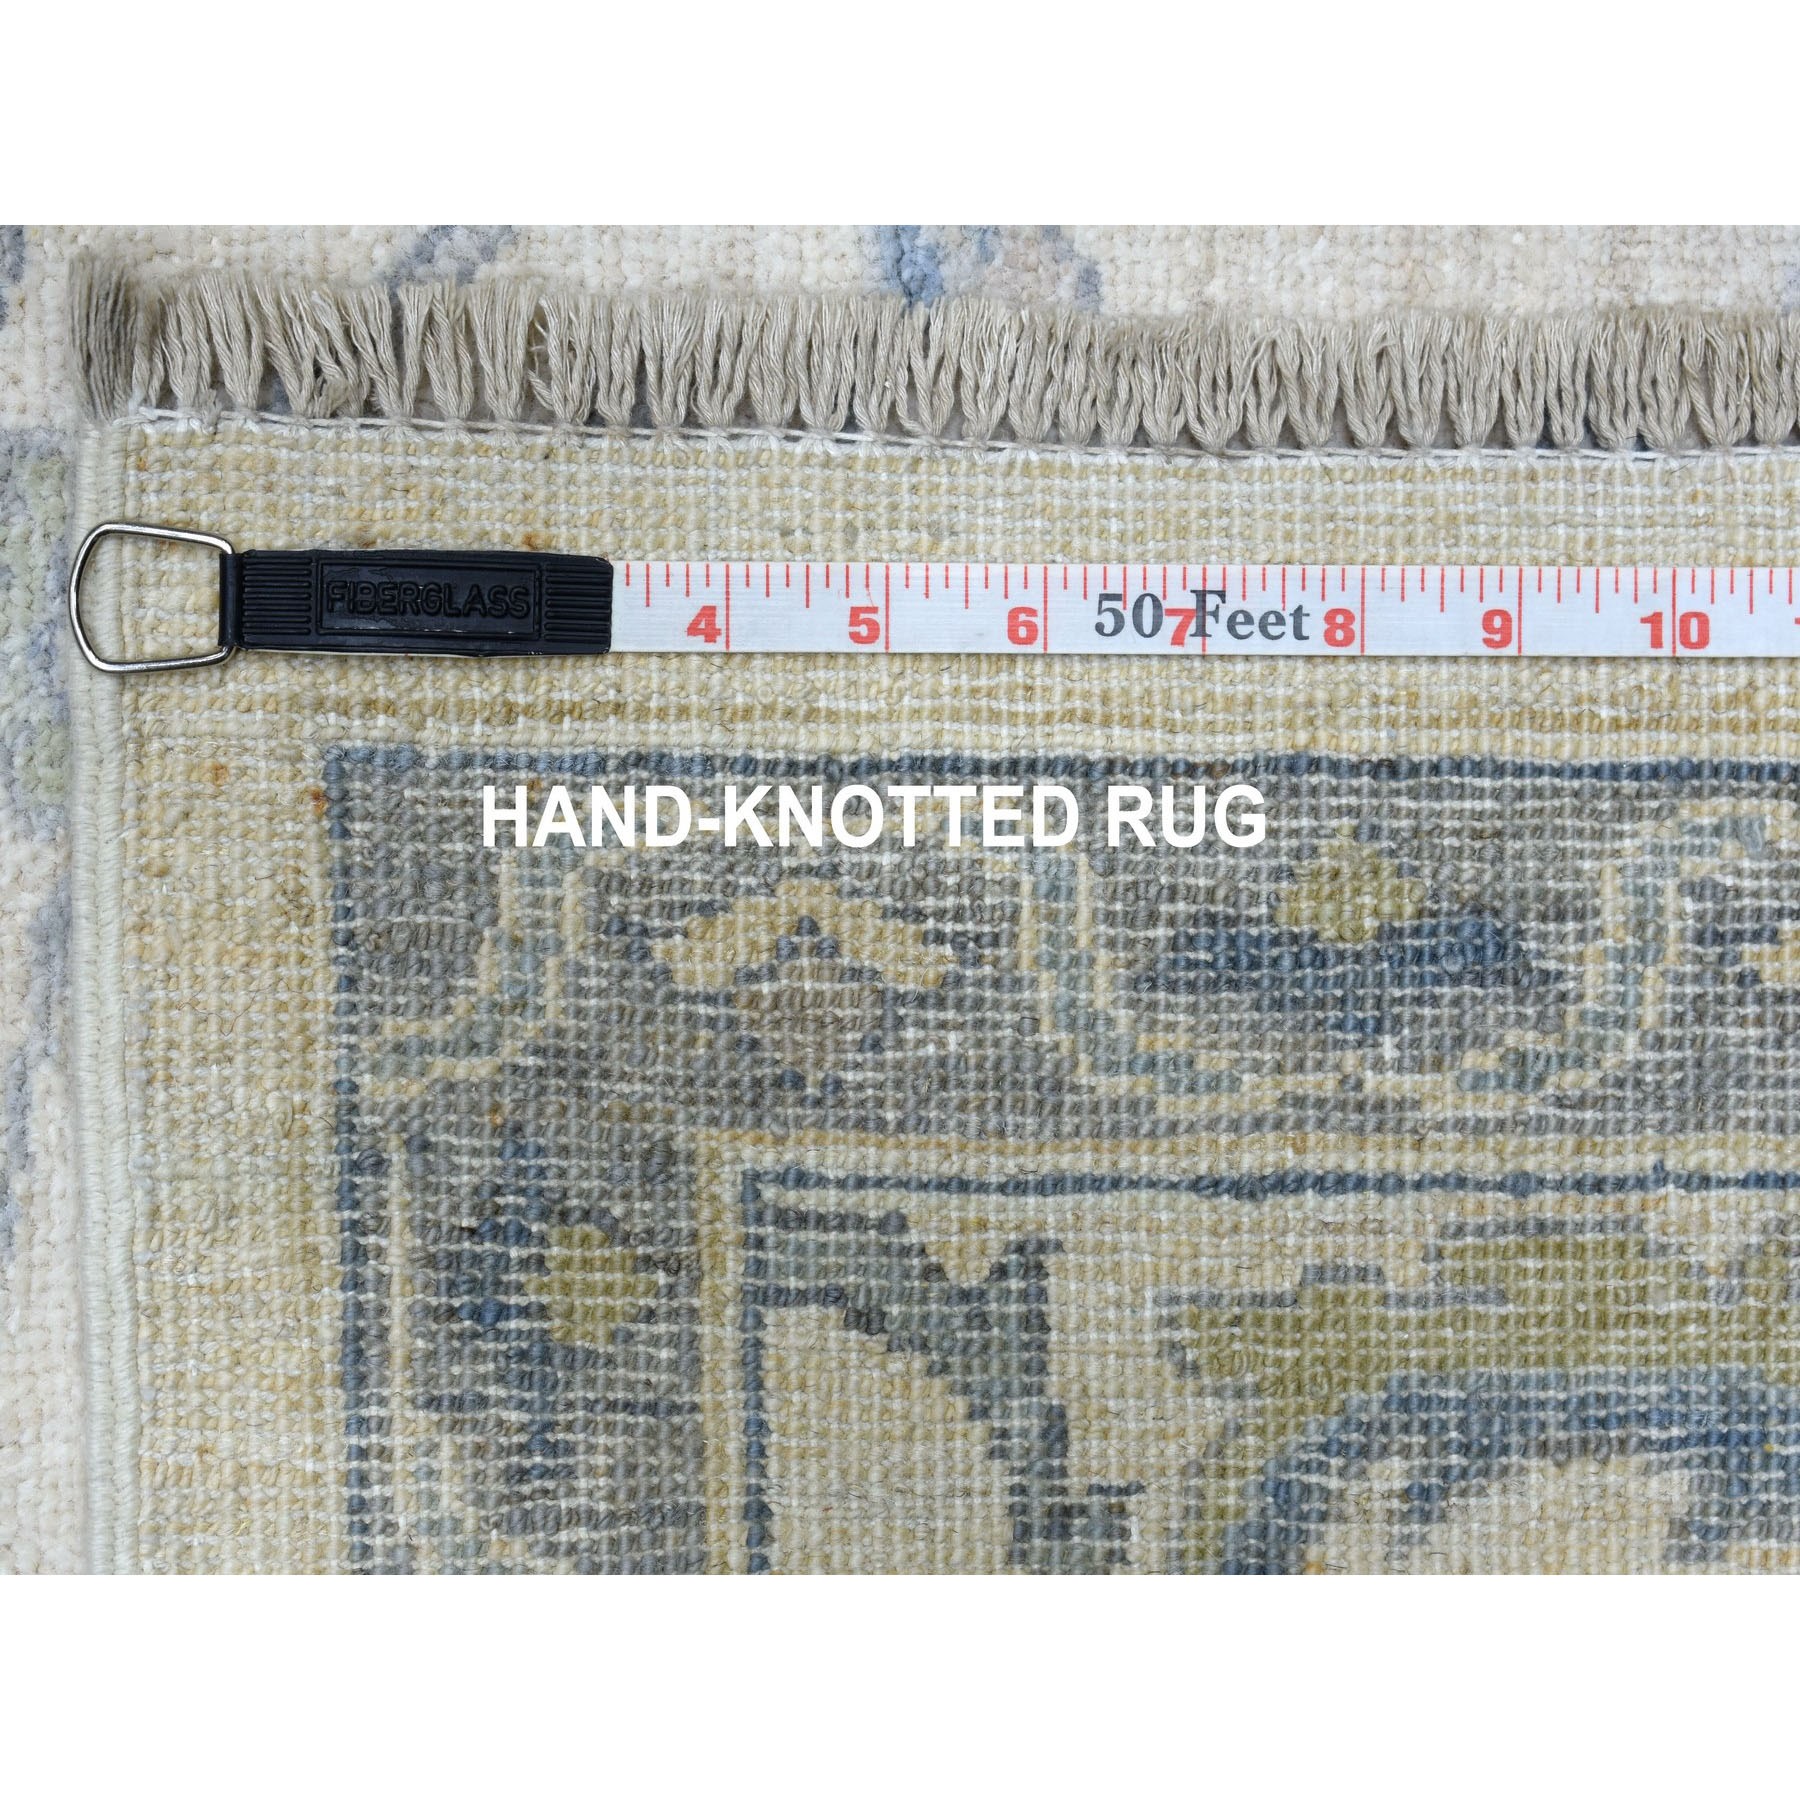 8-x9-8  White Wash Peshawar Pure Wool Hand Knotted Oriental Rug 